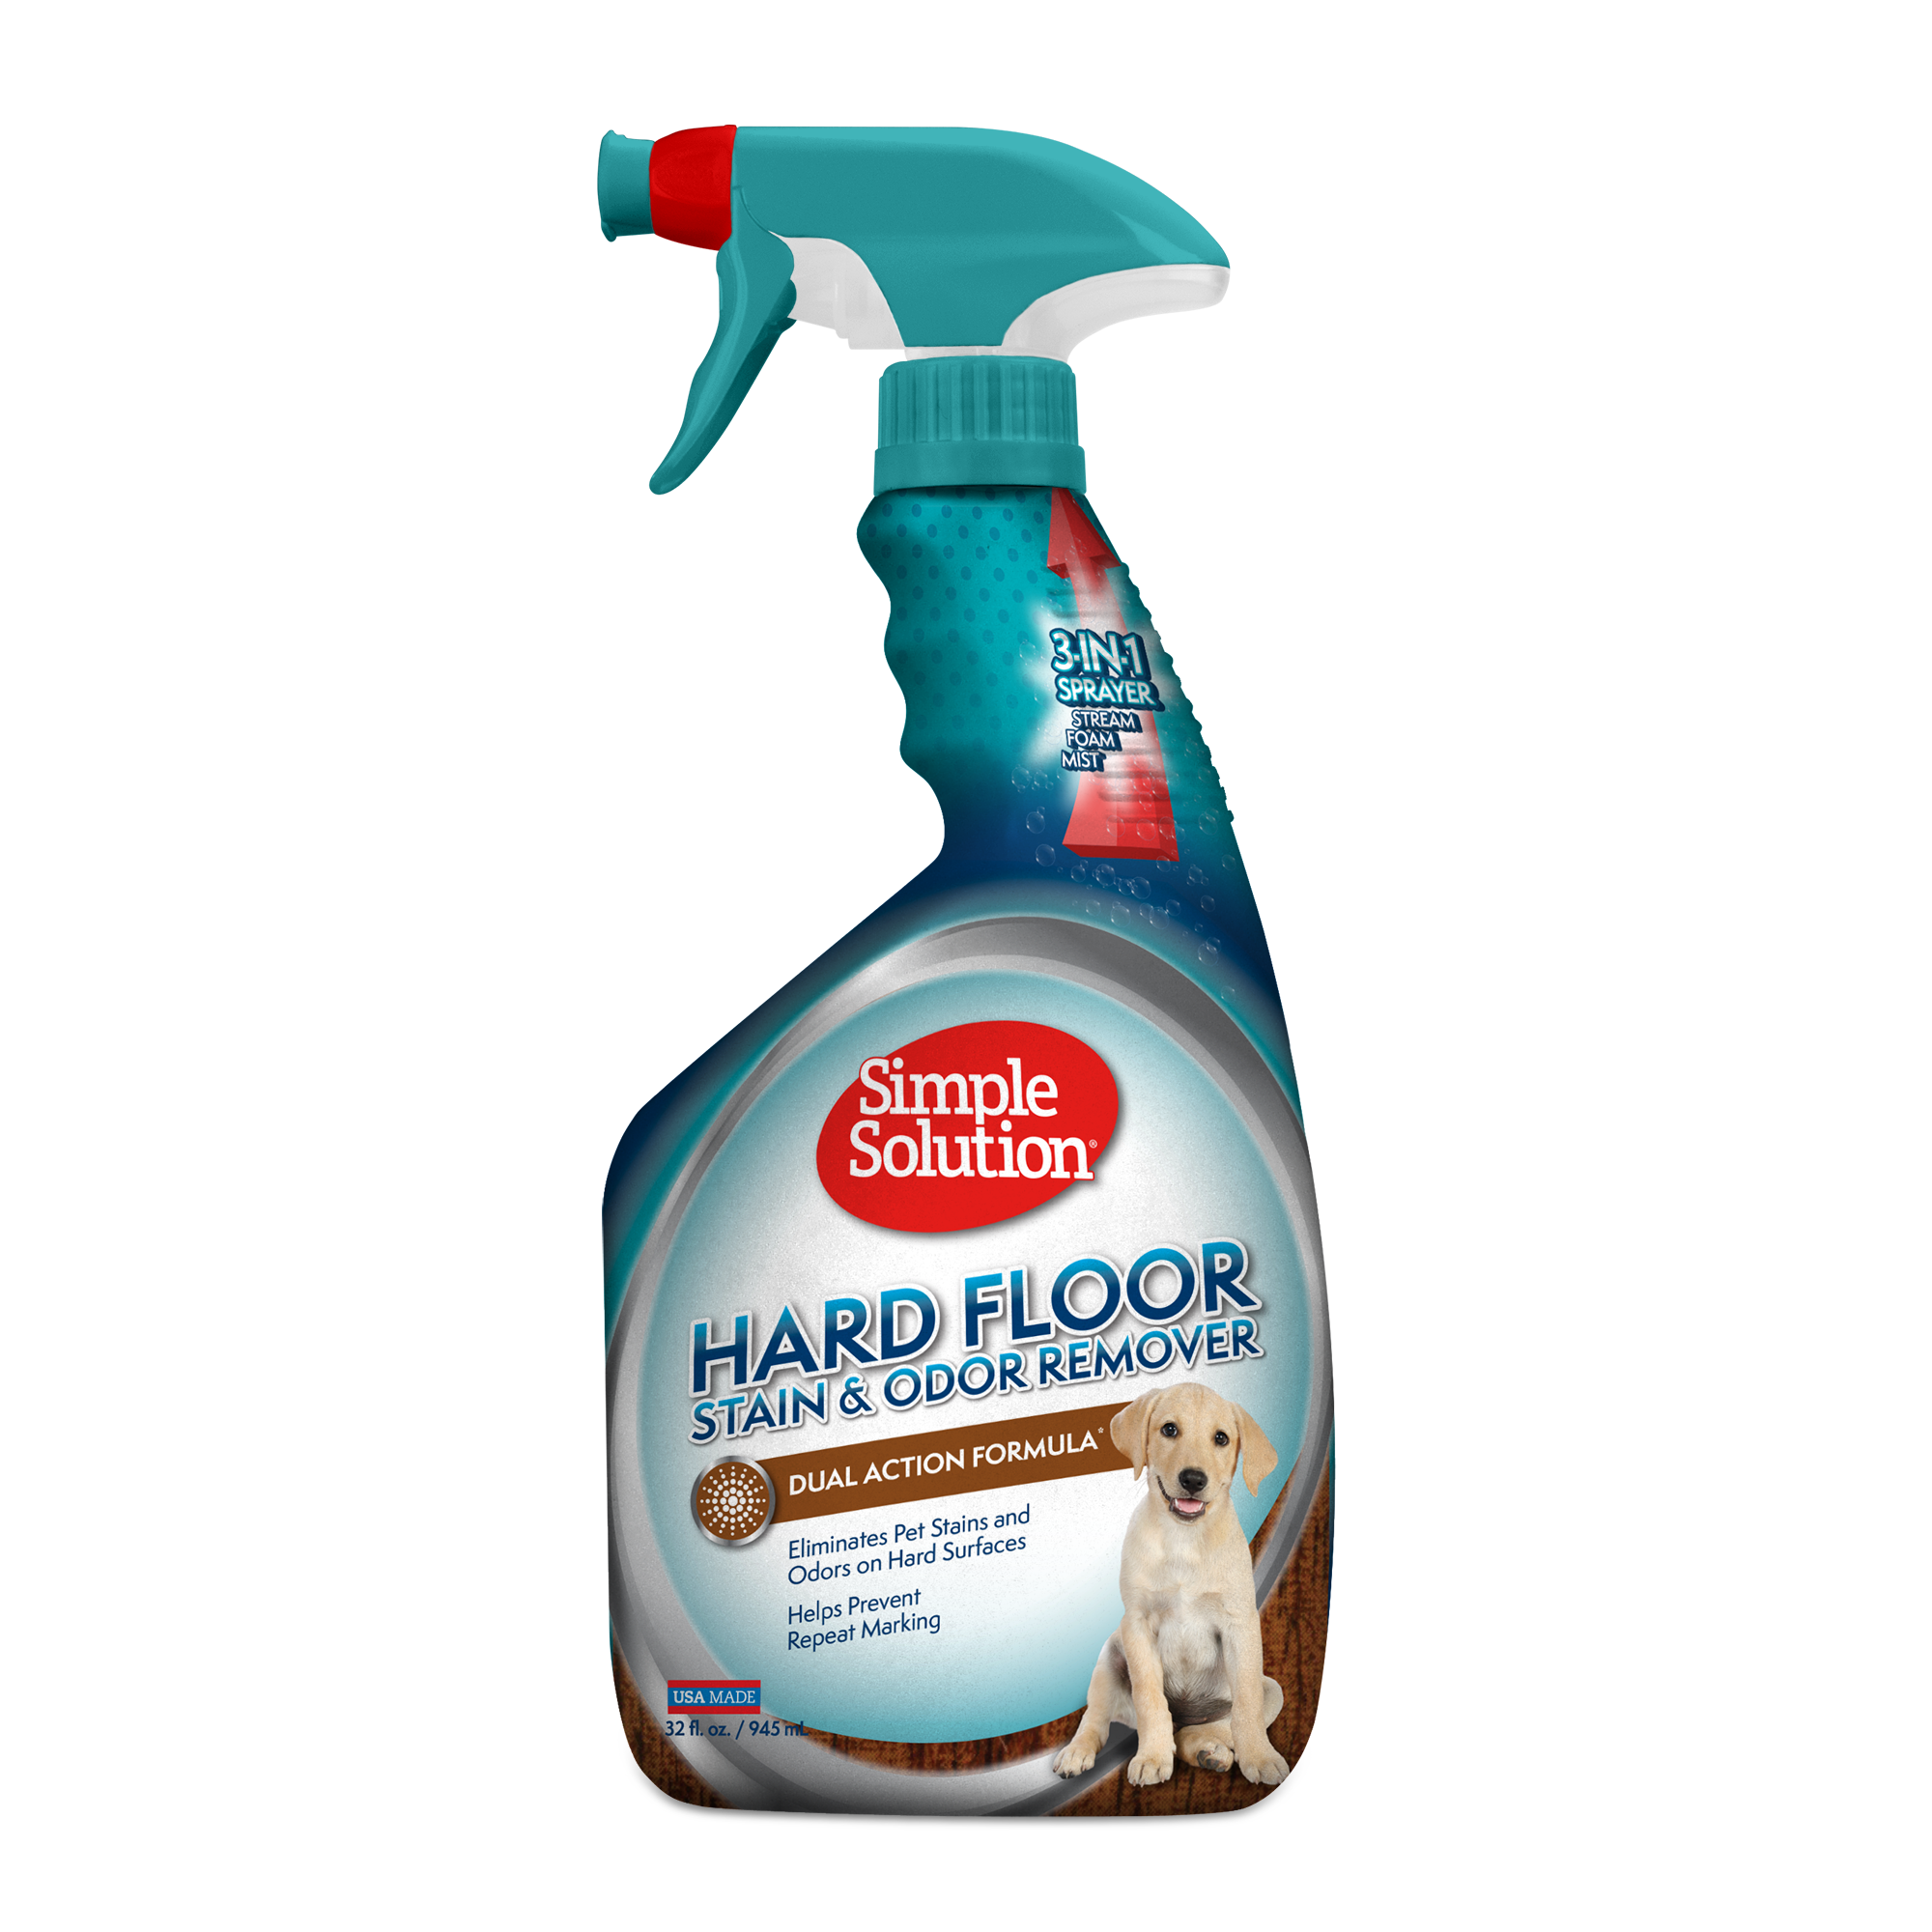 Hard Floor Stain And Odor Remover